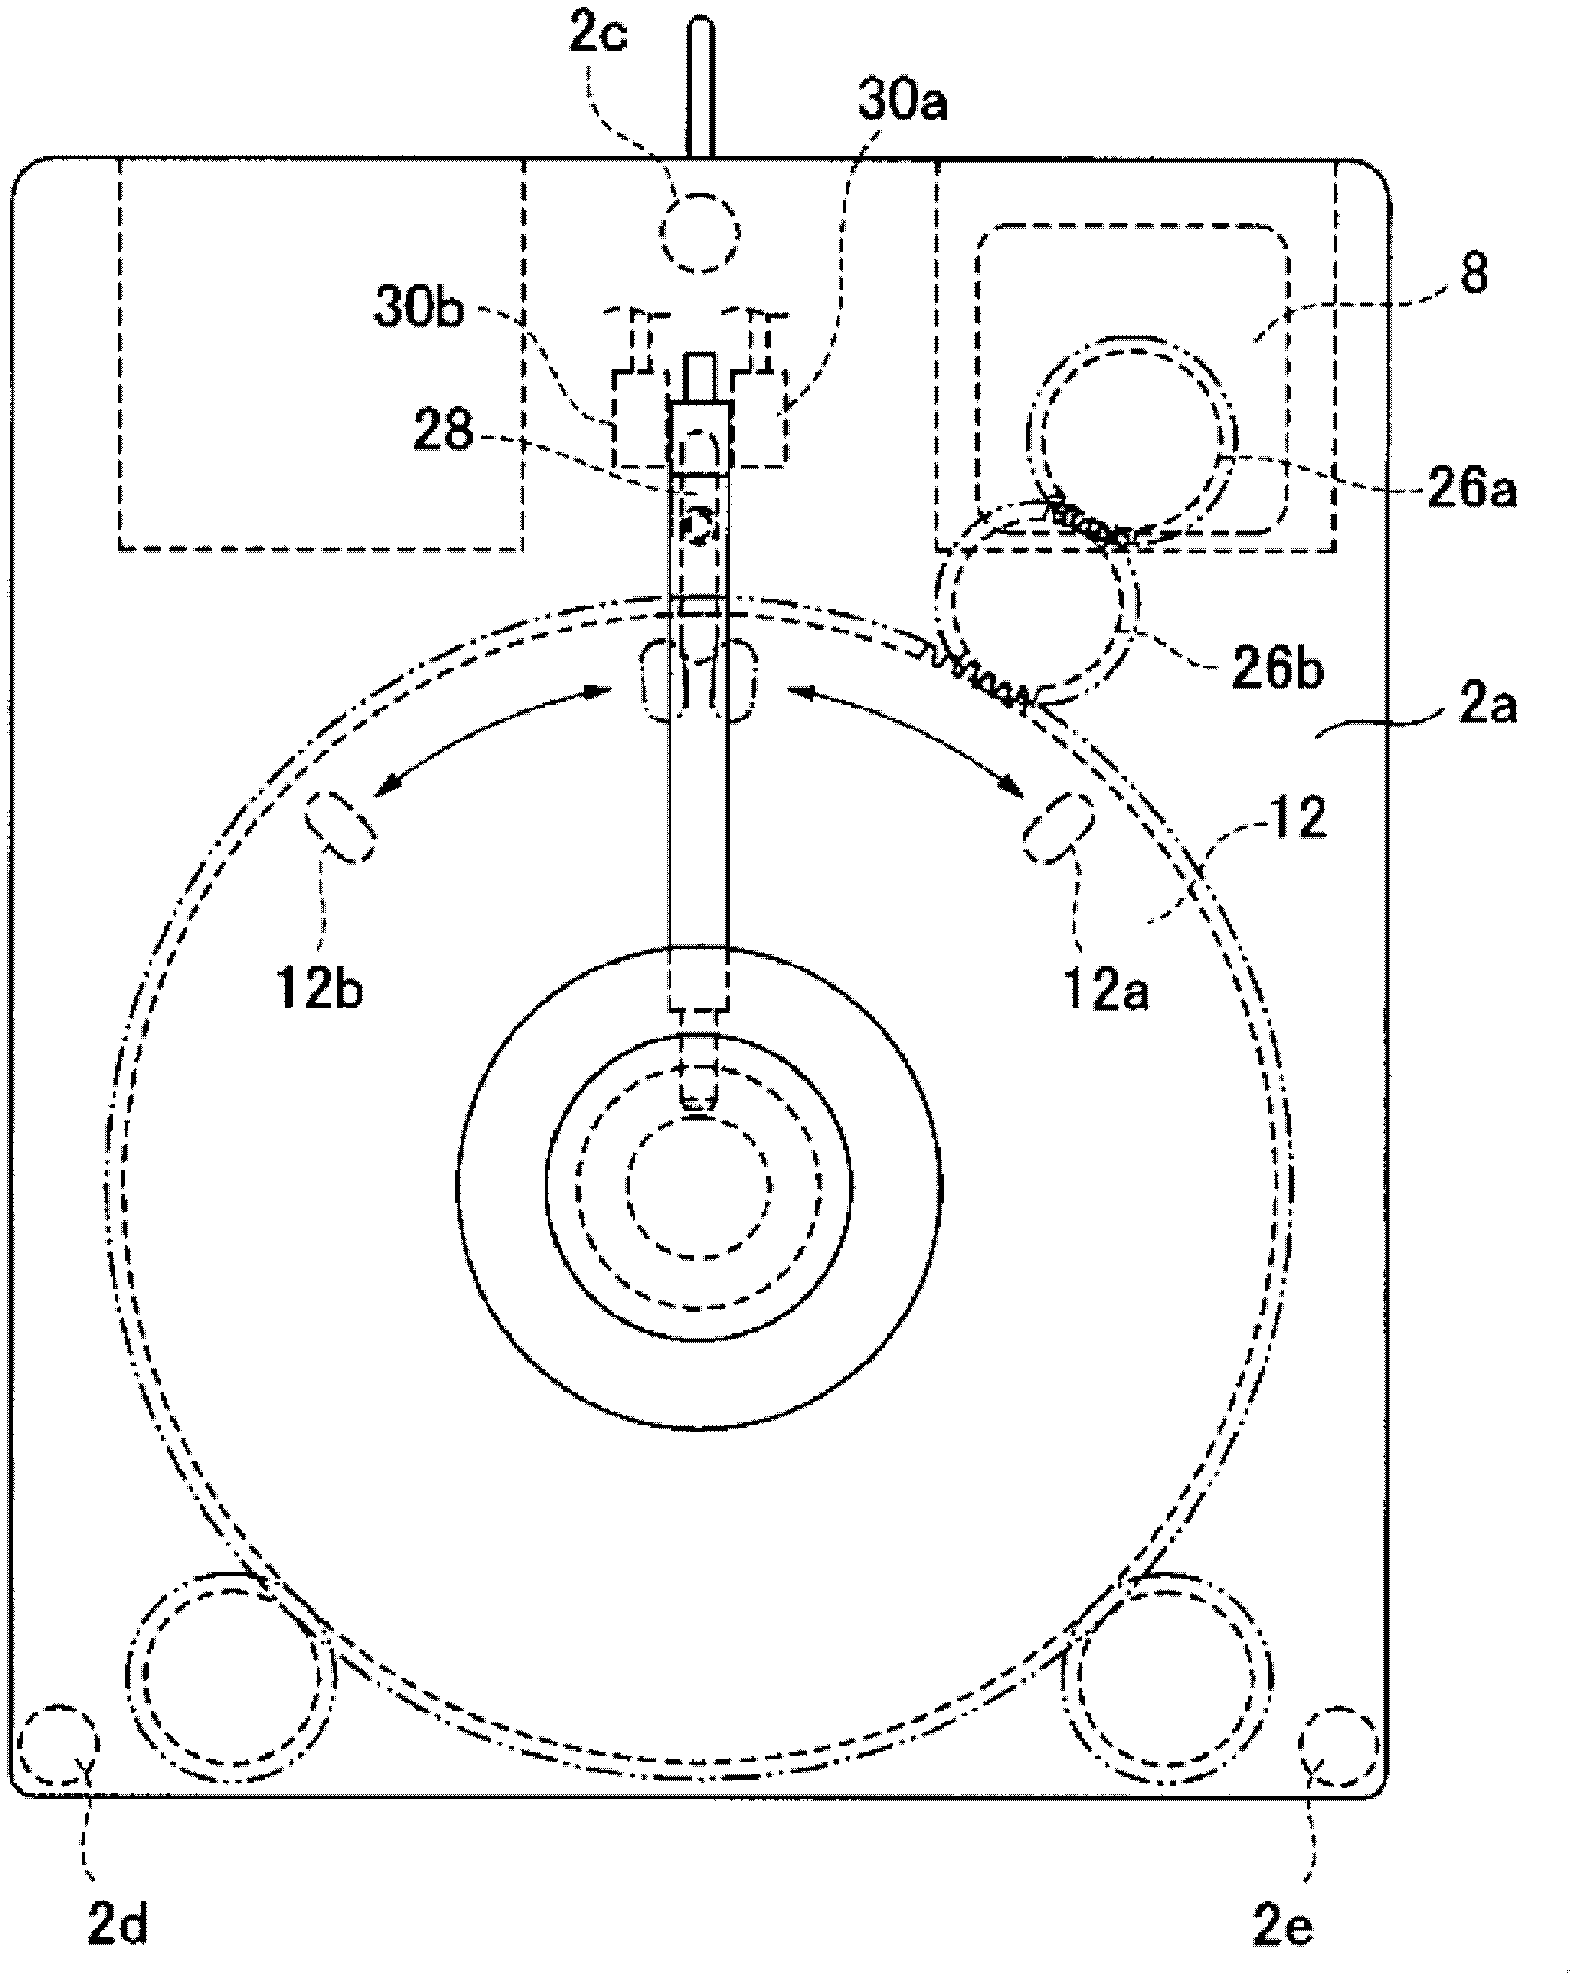 Method of barrel electroplating with aluminum or aluminum alloy